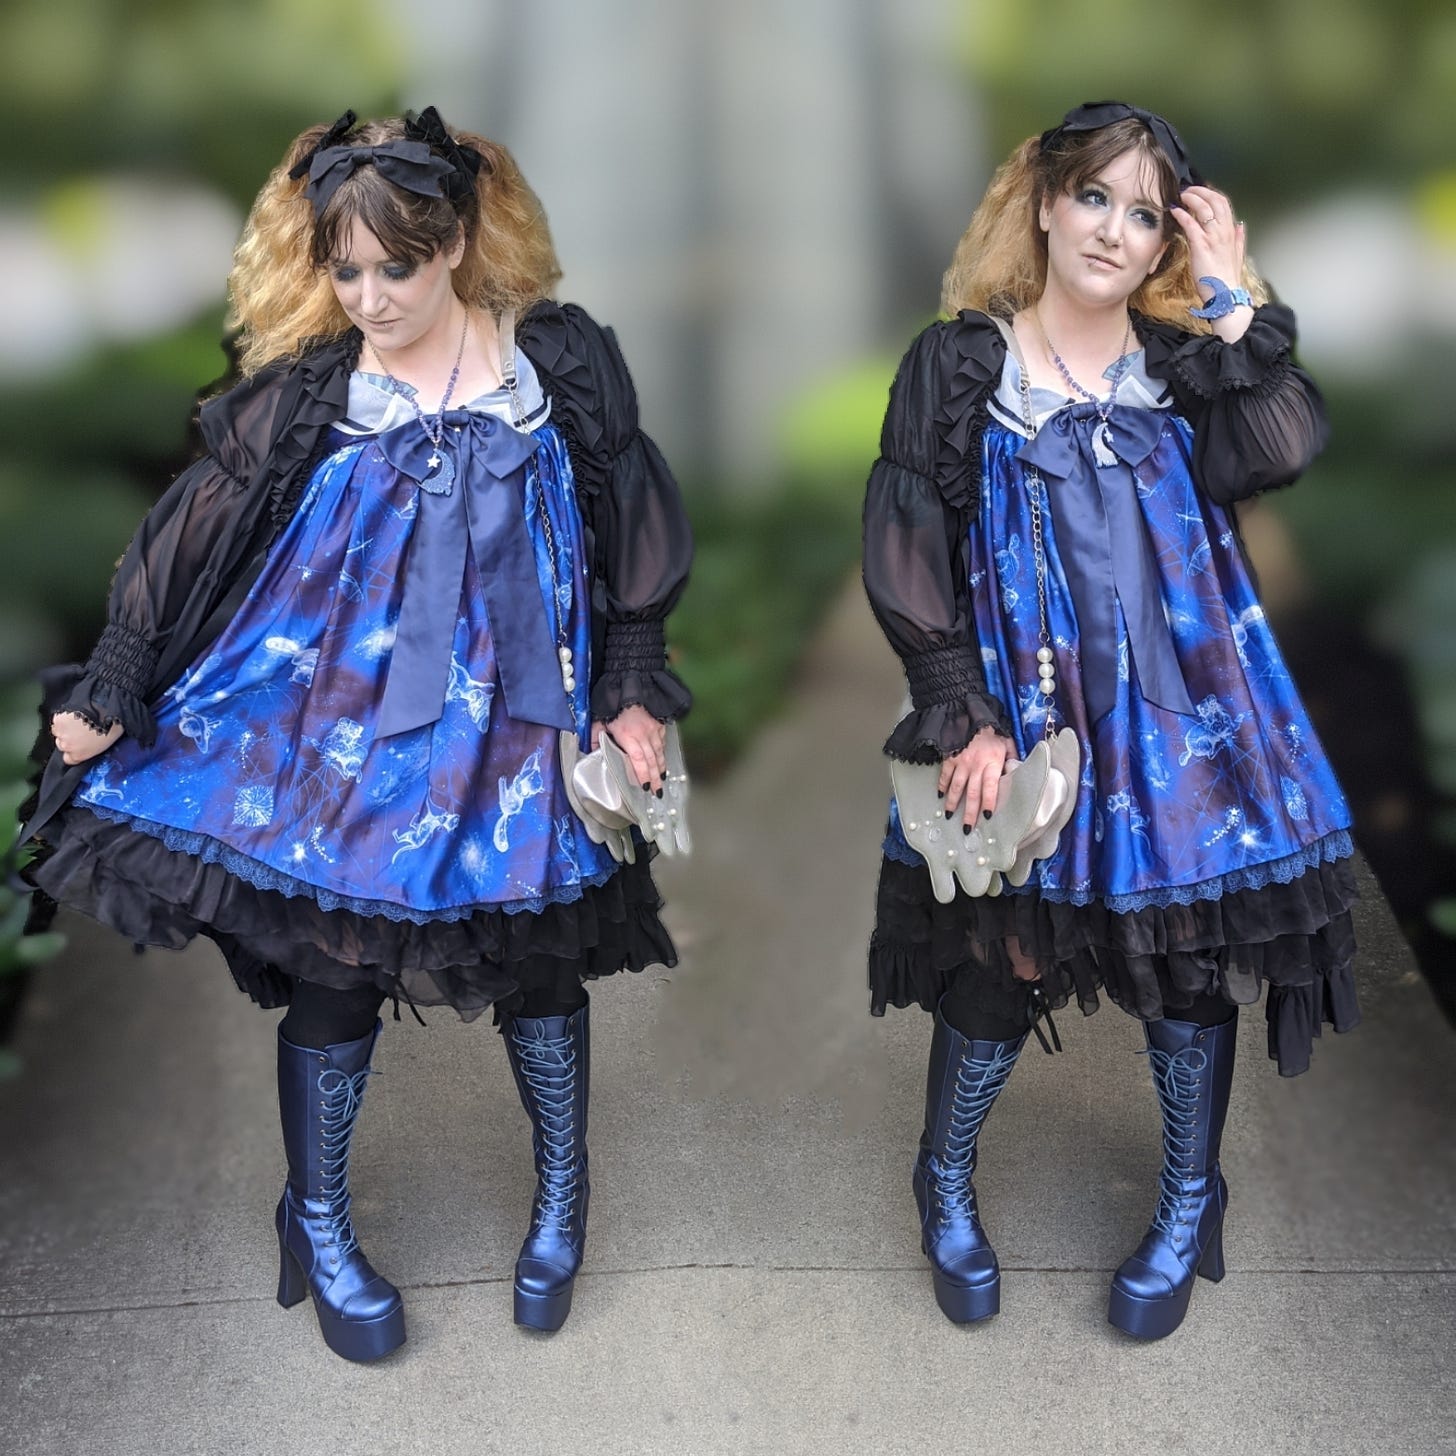 Nif (a white woman with brown/blonde hair) shown twice, mirrored, with a blurred background, wearing the same outfit. She wears Angelic Pretty's Dreamy Planetarium sailor JSK in navy. She is also wearing a black sheer overdress, a black sheer underskirt, black OTKs with ribbon trim, and blue knee-length high-heel boots. She is holding a silver vinyl purse shaped like a melting moon. She has a blue acrylic moon-shaped pendant, a black bow headband, and black velvet bows in her twin tails. In her pose on the right, you can see a blue acrylic moon bracelet on her left wrist.